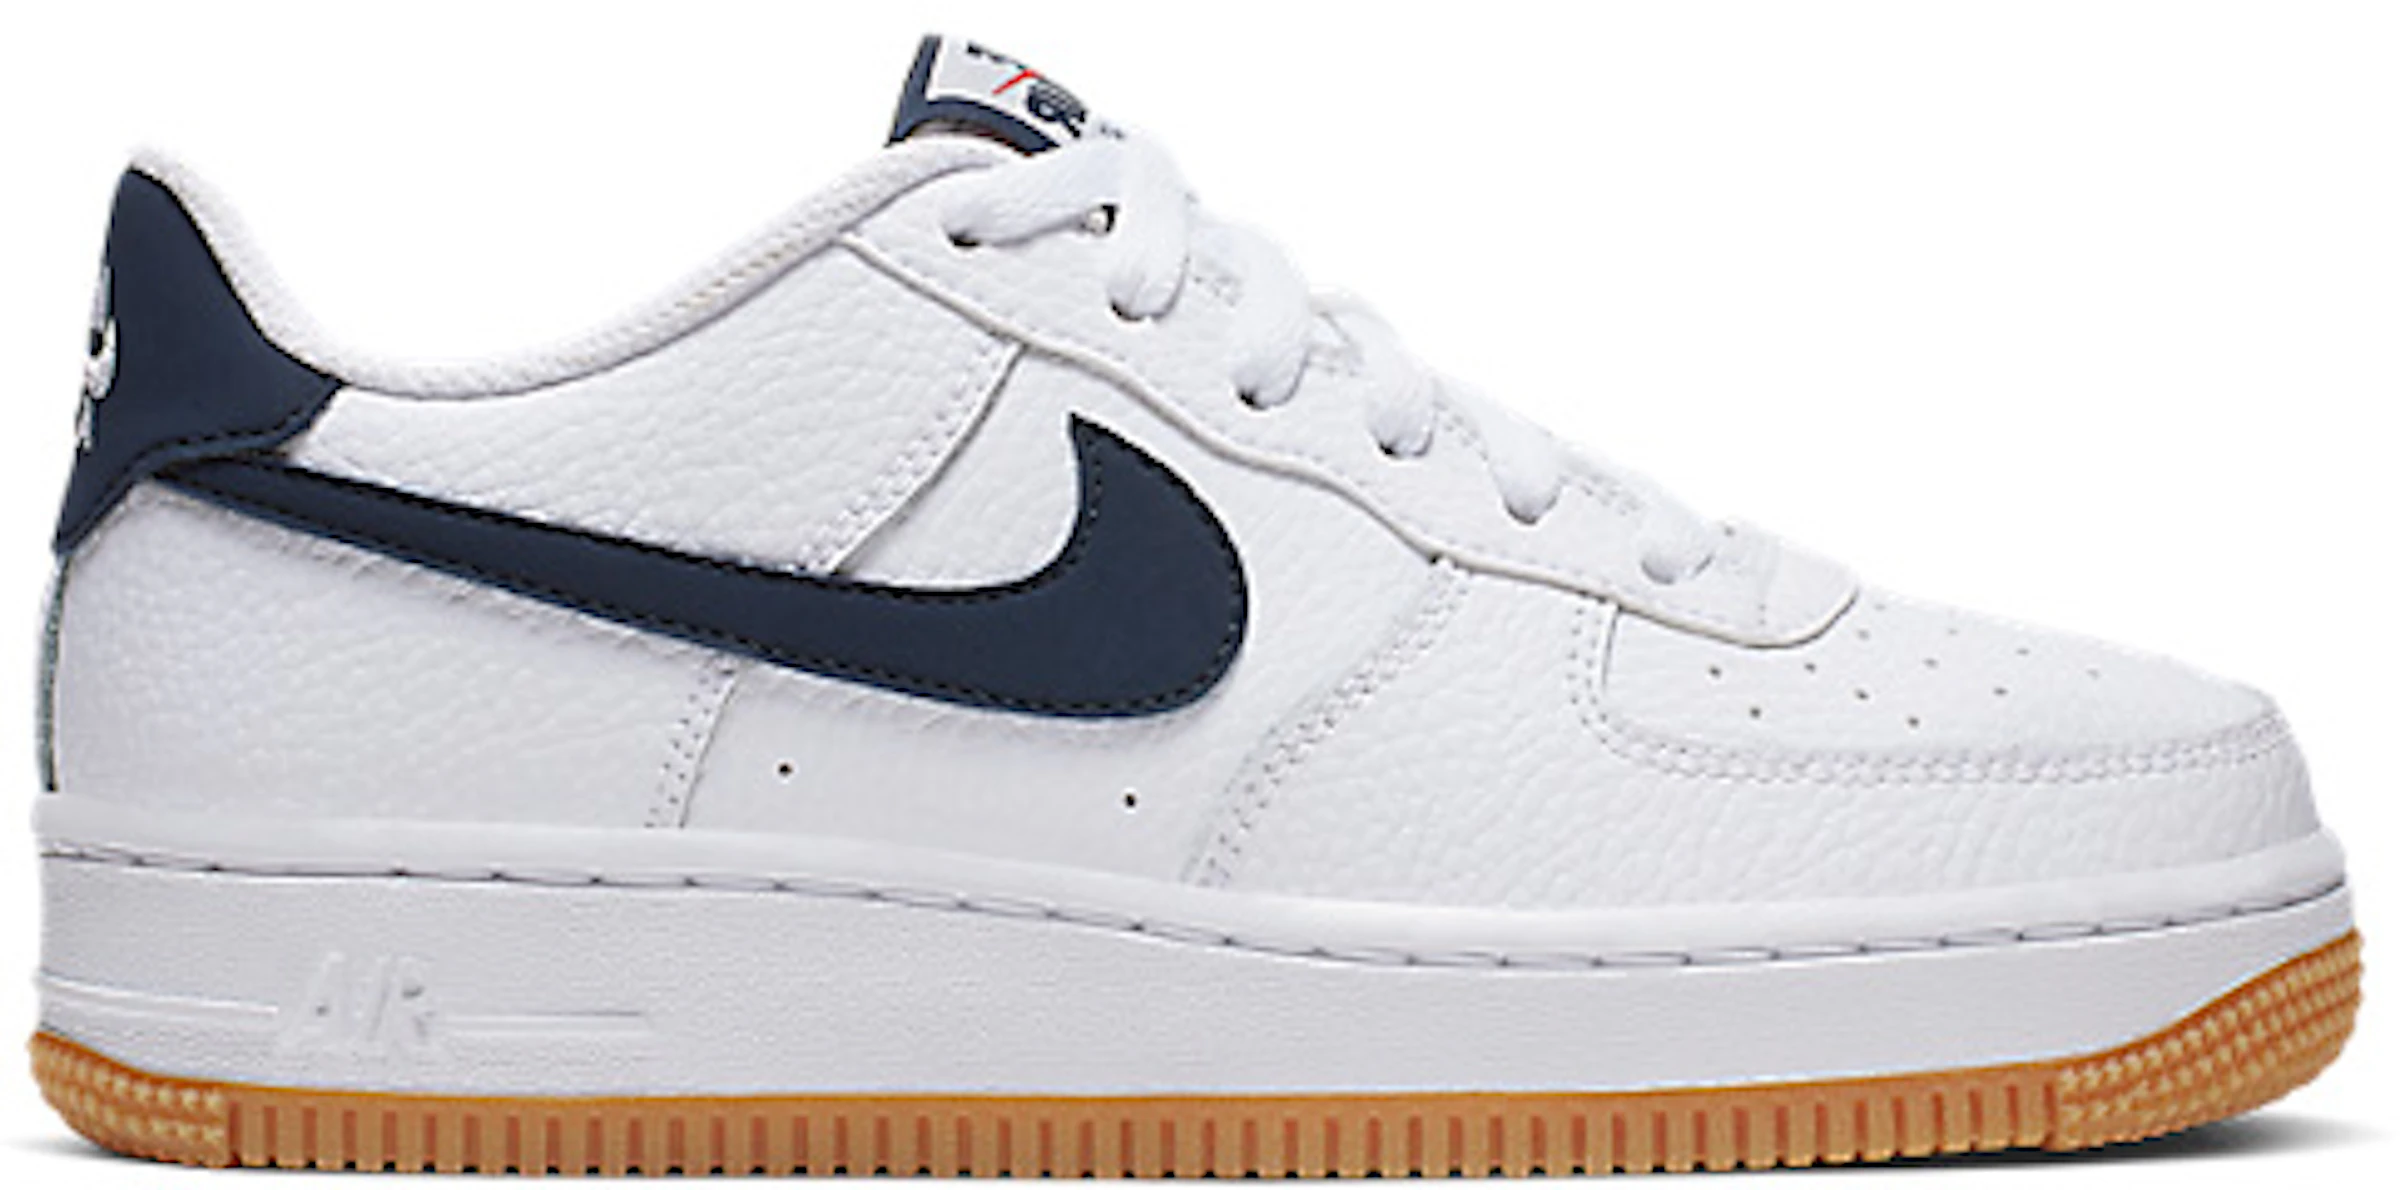 Tranquilidad portón Margaret Mitchell Nike Air Force 1 Low White Obsidian (GS) - CI1759-100 - ES